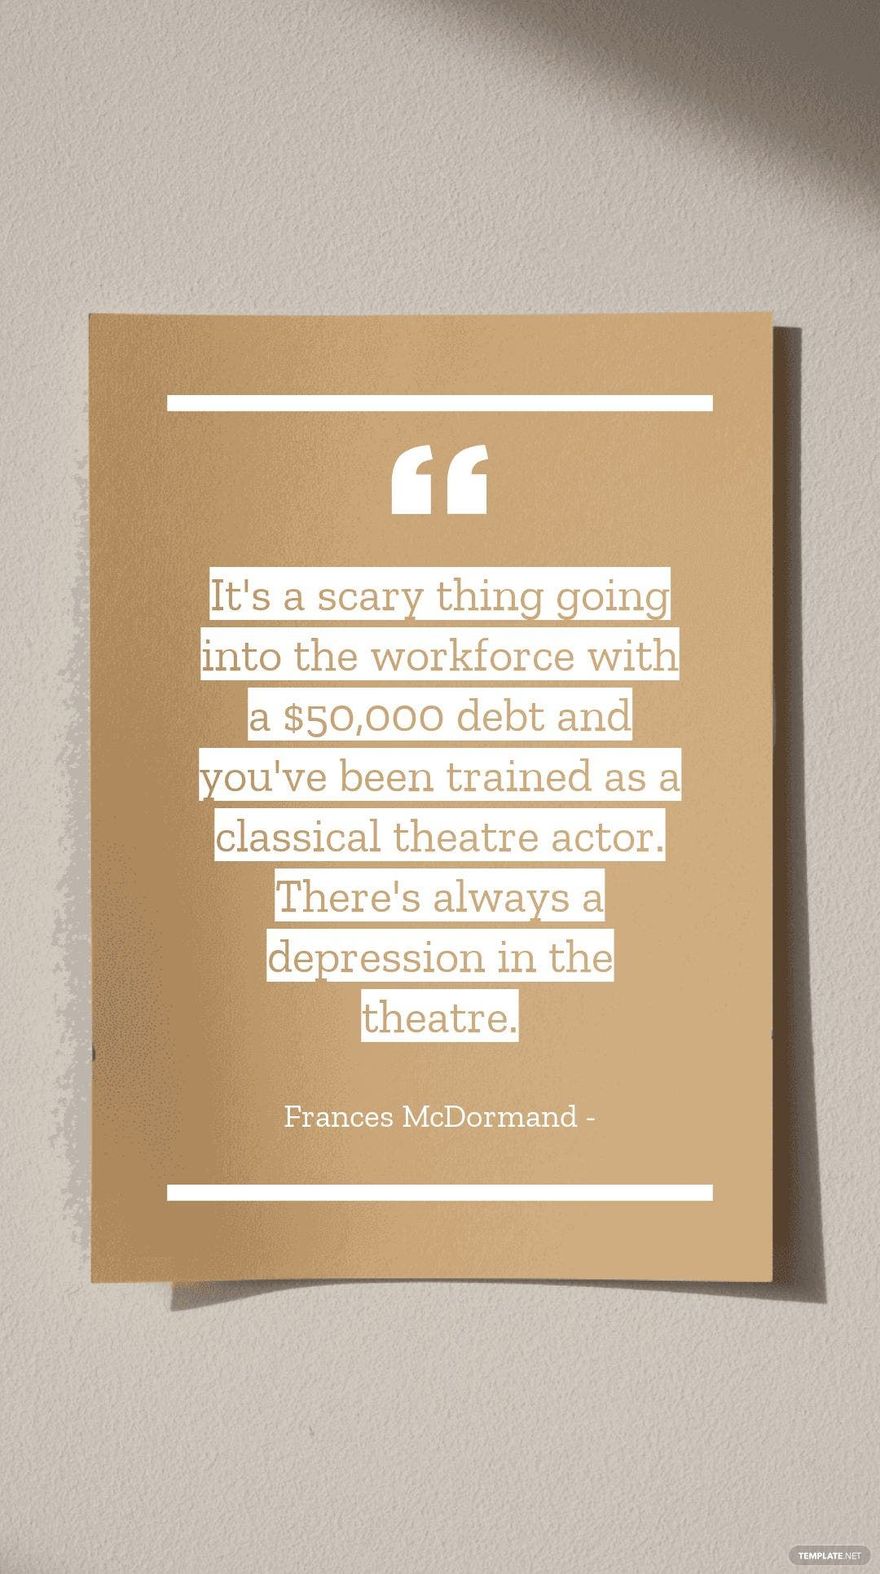 Frances McDormand - It's a scary thing going into the workforce with a $50,000 debt and you've been trained as a classical theatre actor. There's always a depression in the theatre.